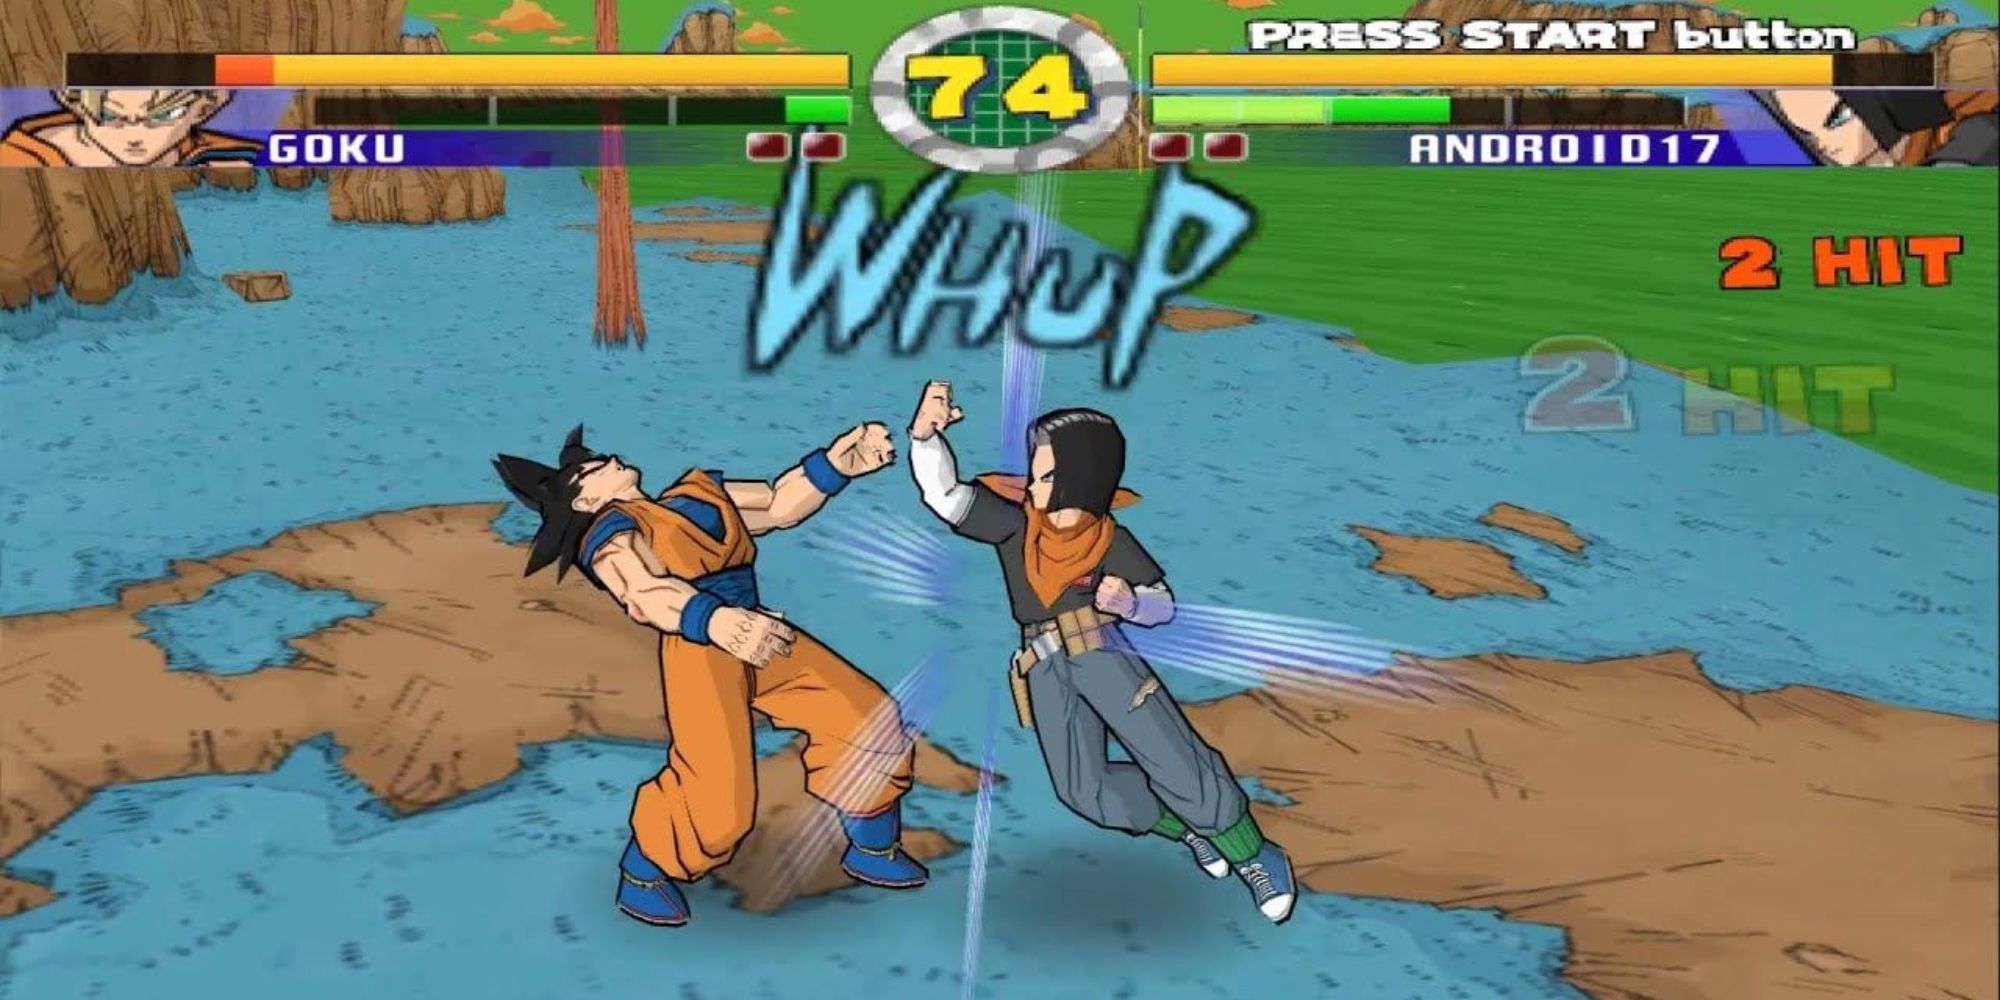 Goku getting a swift uppercut while fighting Android 17